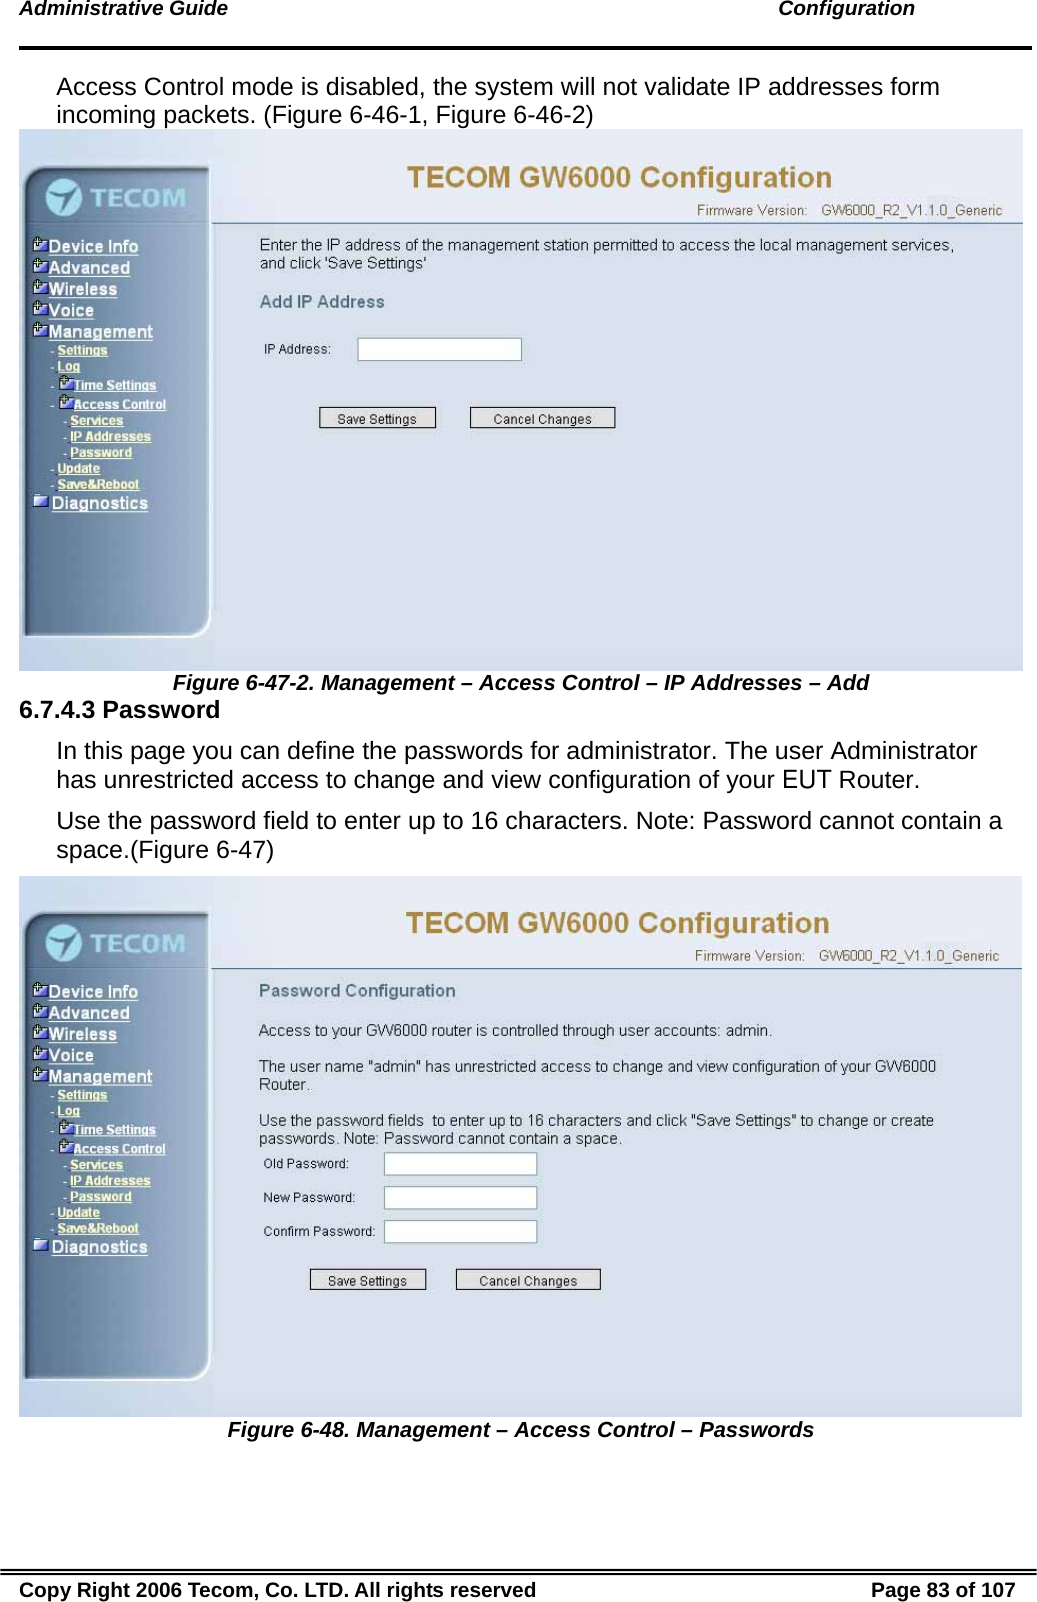 Administrative Guide                                                                                               Configuration Access Control mode is disabled, the system will not validate IP addresses form incoming packets. (Figure 6-46-1, Figure 6-46-2)  Figure 6-47-2. Management – Access Control – IP Addresses – Add 6.7.4.3 Password In this page you can define the passwords for administrator. The user Administrator has unrestricted access to change and view configuration of your EUT Router. Use the password field to enter up to 16 characters. Note: Password cannot contain a space.(Figure 6-47)  Figure 6-48. Management – Access Control – Passwords Copy Right 2006 Tecom, Co. LTD. All rights reserved  Page 83 of 107 